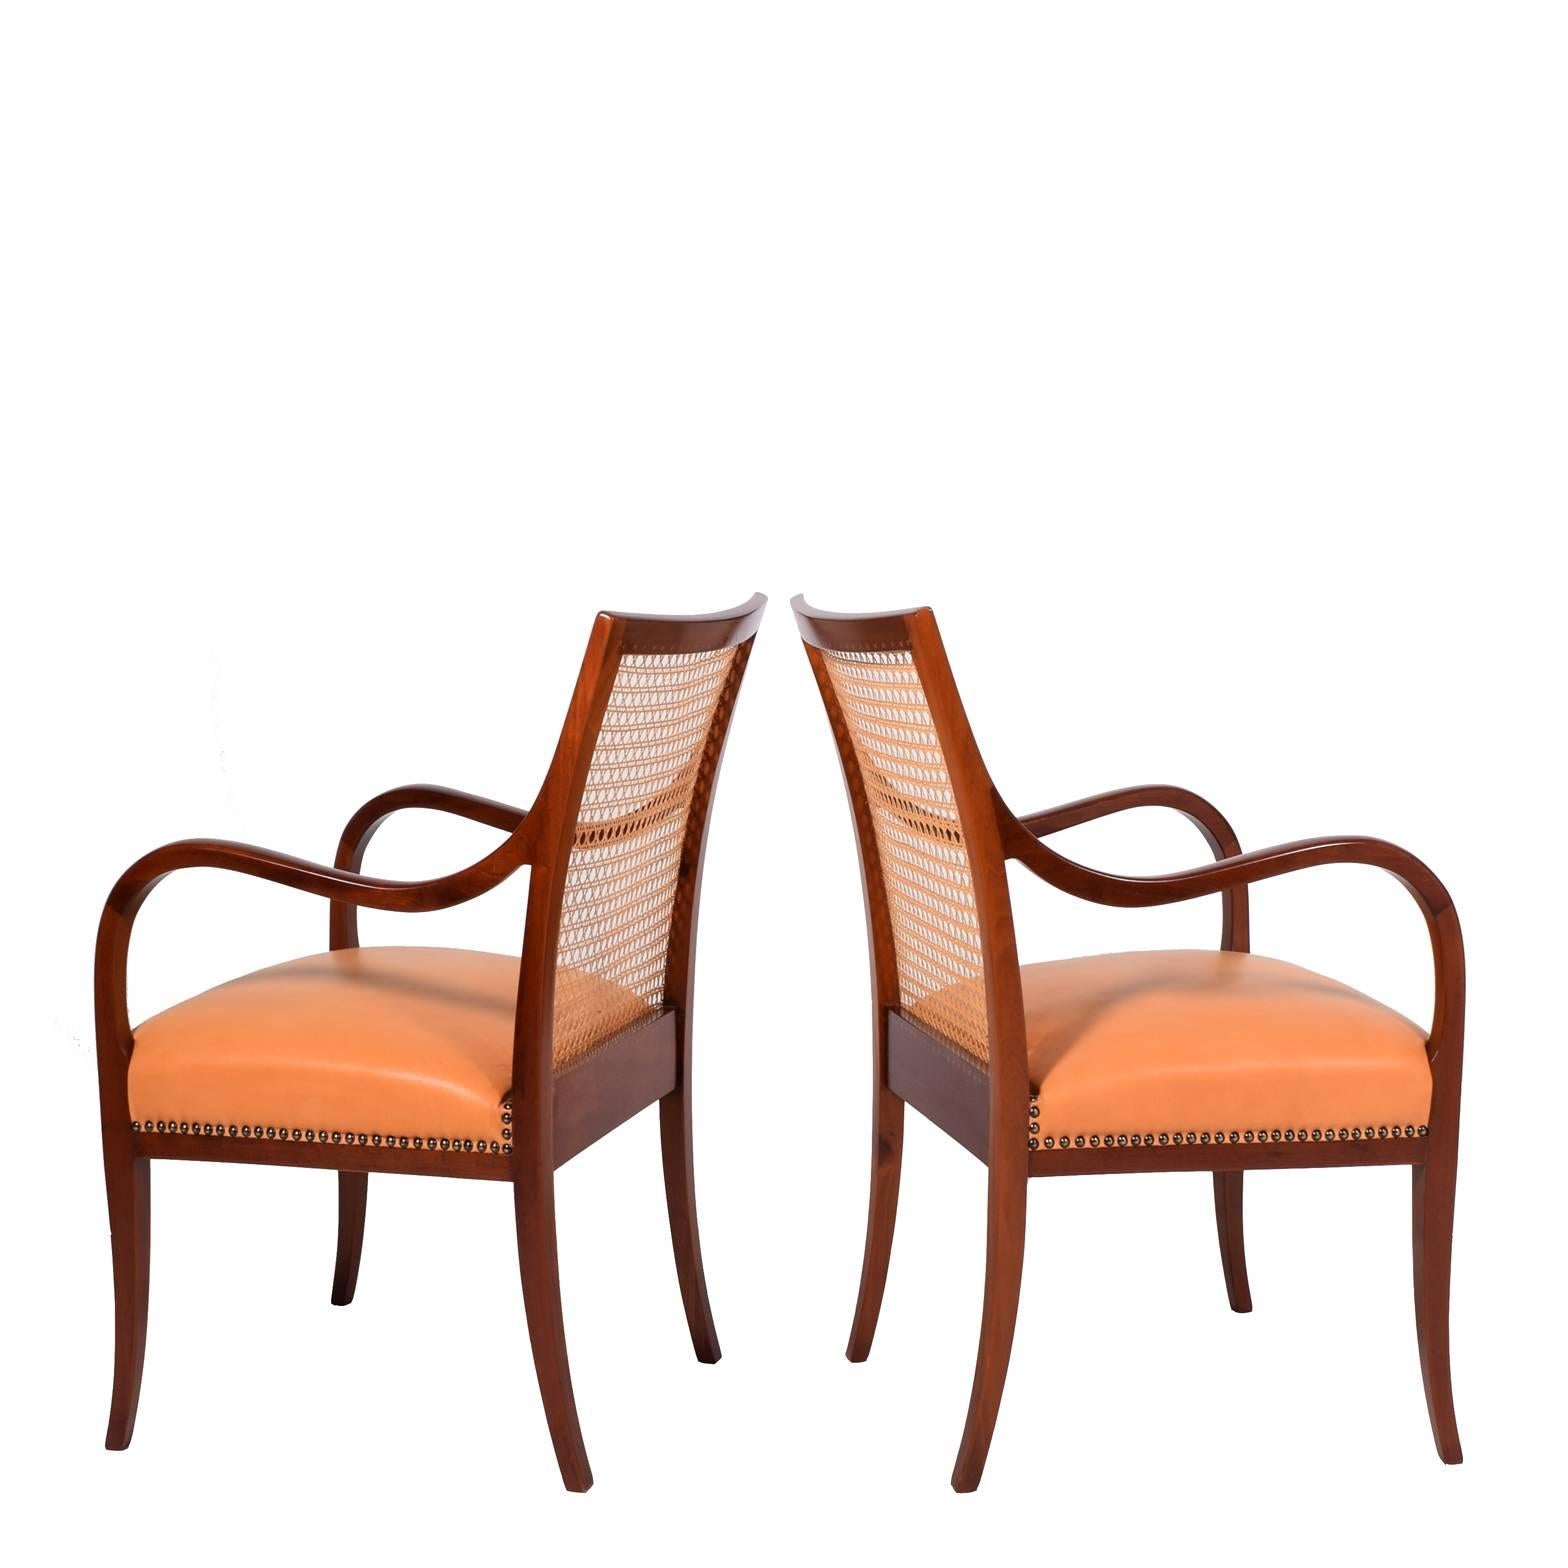 Elegant pair of armchairs with cane back and leather seat on solid Cuban mahogany frame. Curved arms and legs; seat with brass nailhead detail. Seat reupholstered in natural Vegeta leather. Made by Frits Henningsen Studio.